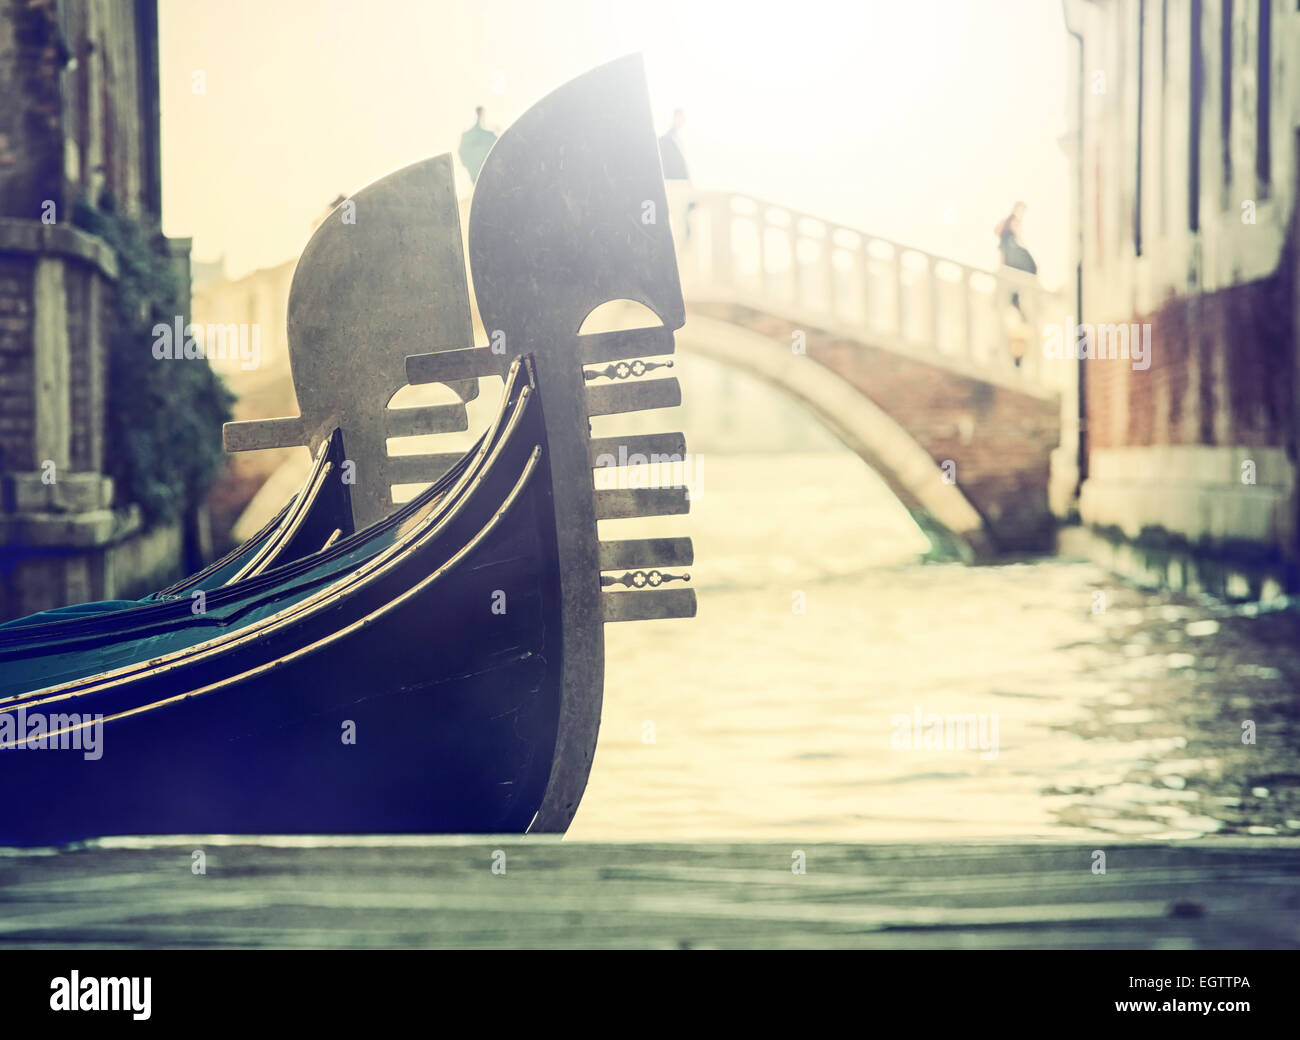 Typical gondolas in Venice, detail of the bow called 'canal grande'. Stock Photo